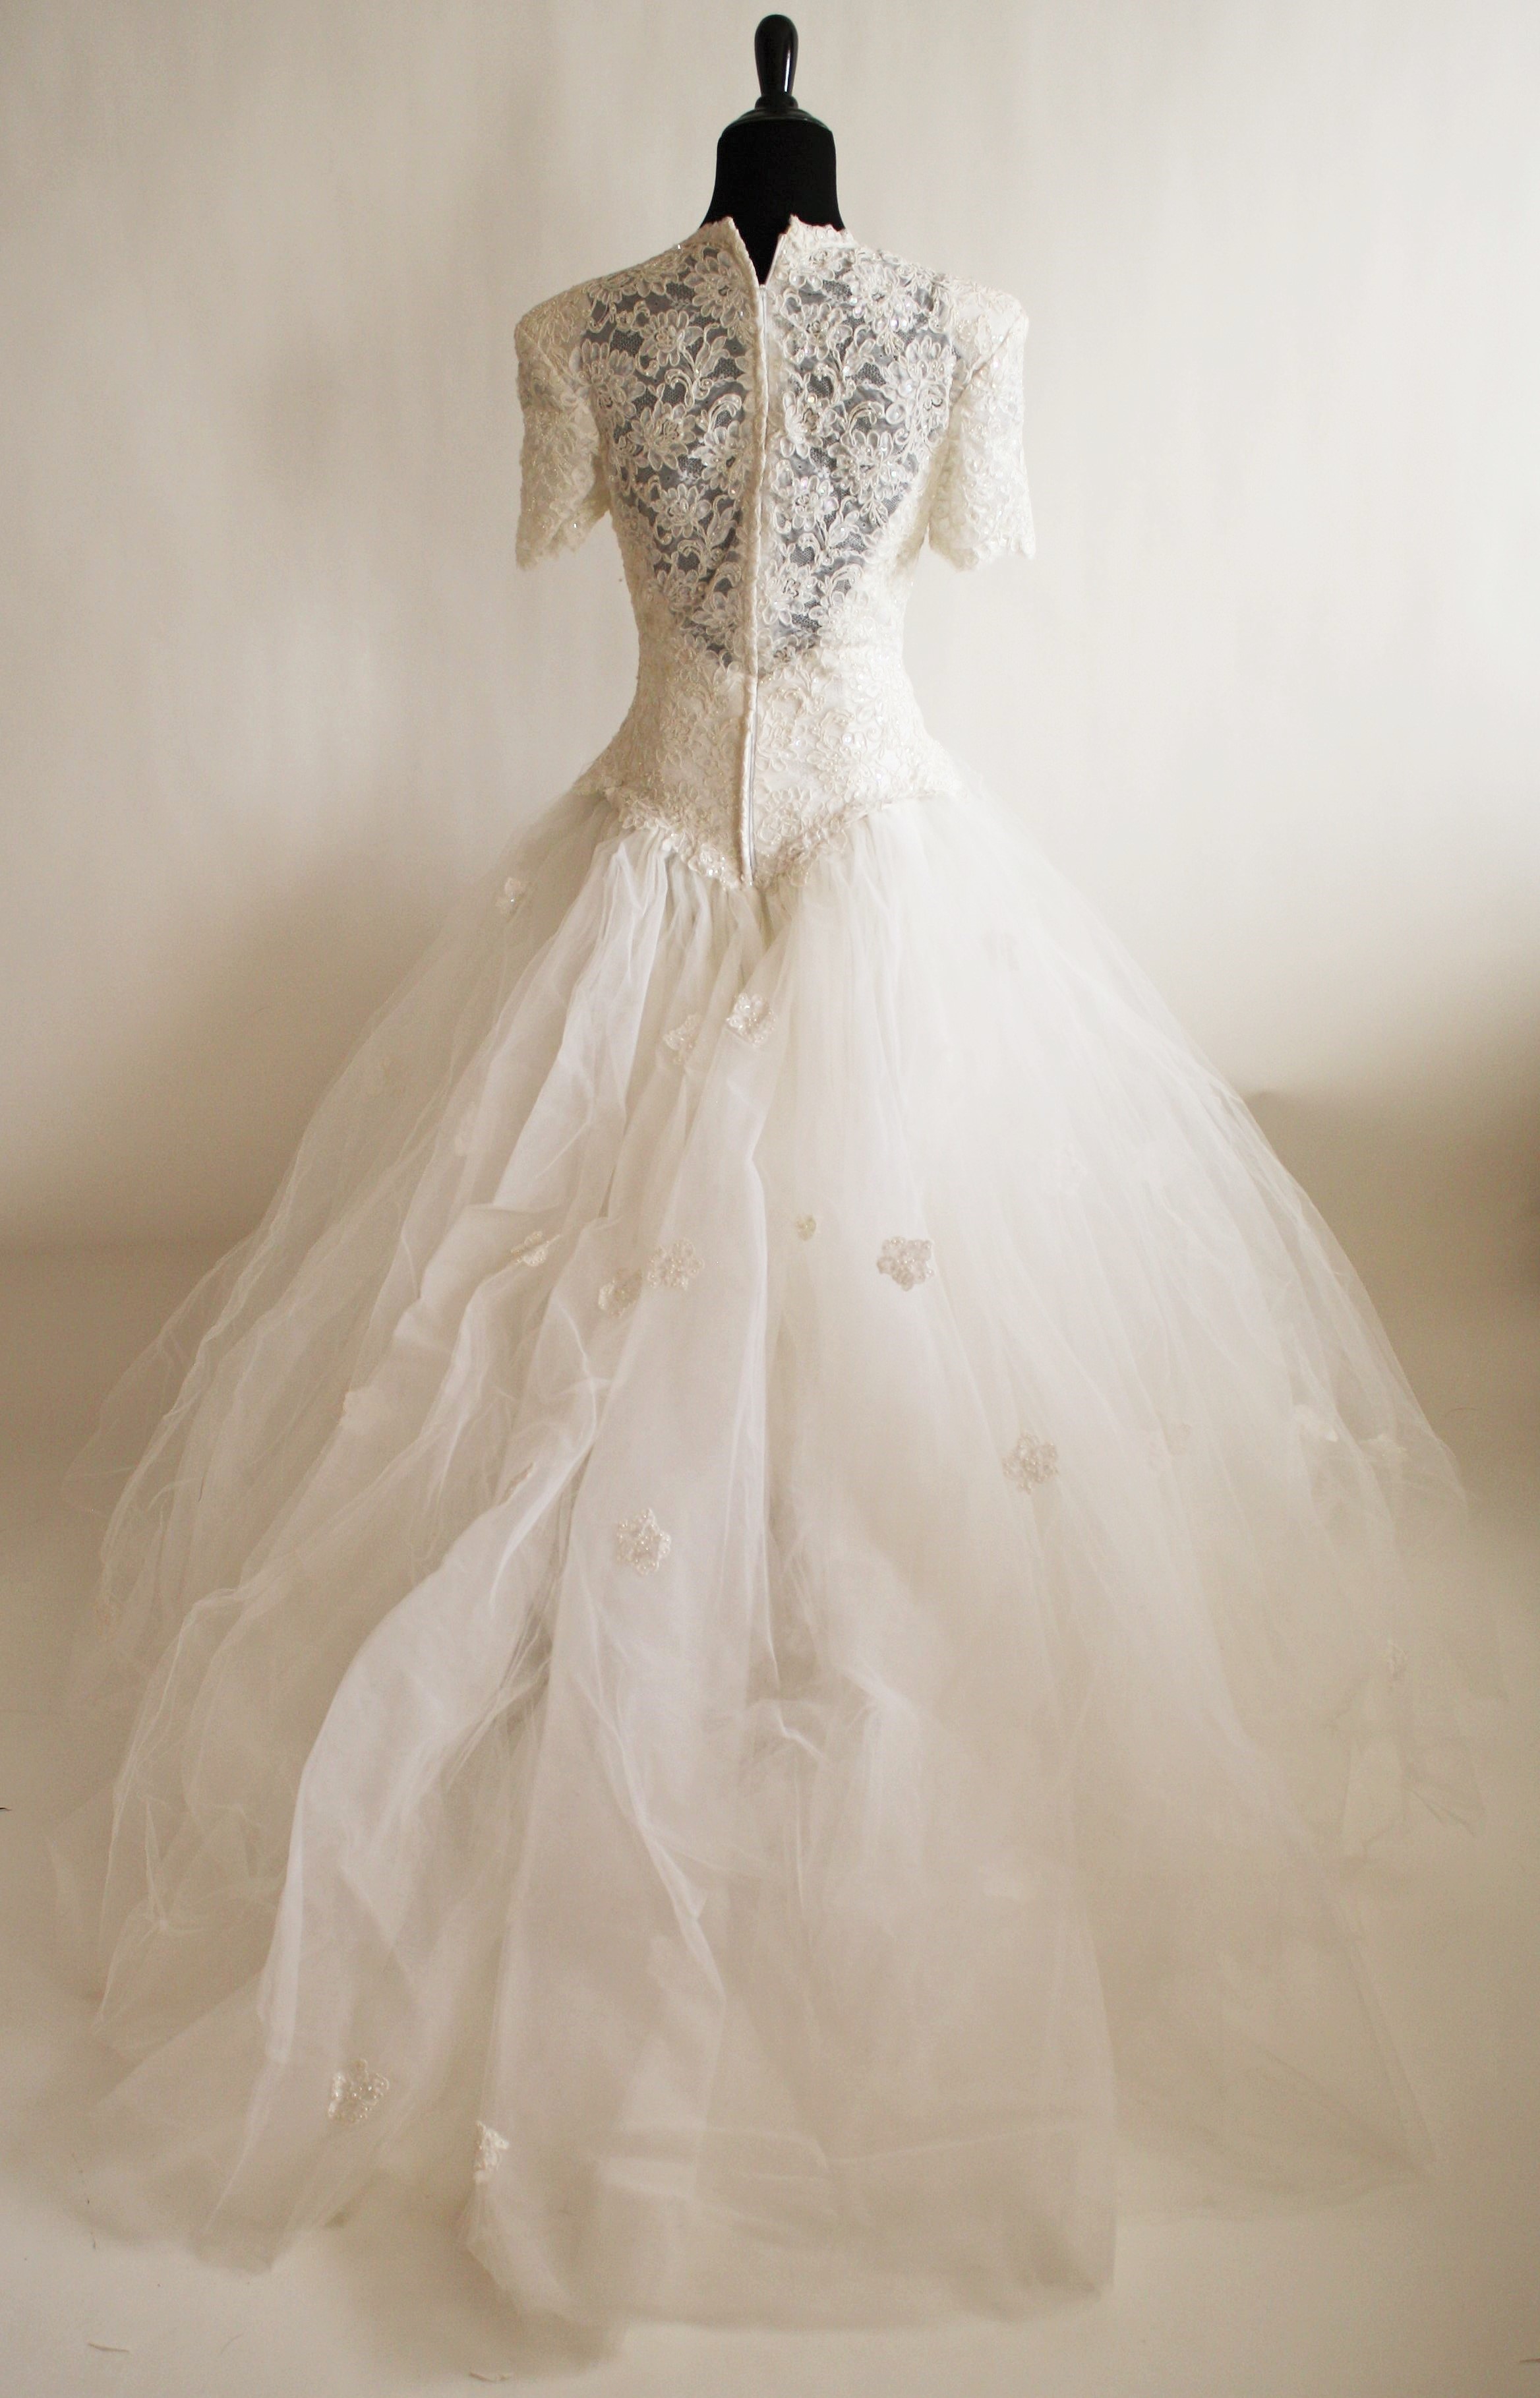 A Vintage Wedding Too's Bridal Gowns - 1990s to Present Day! - A ...